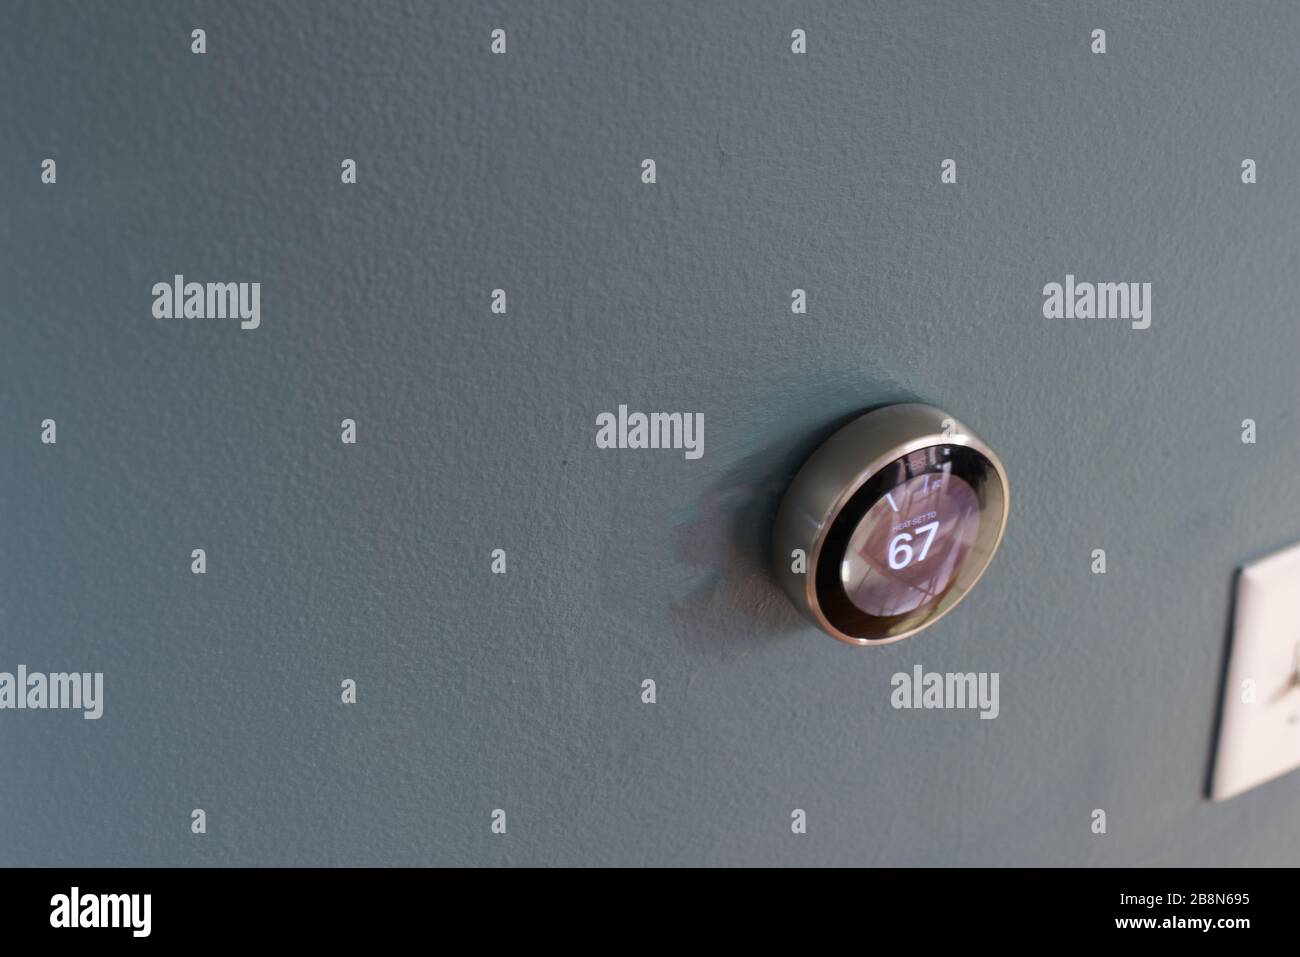 Smart home thermostat from google's nest. Green tech saving heating and cooling costs. Waste reduction Stock Photo